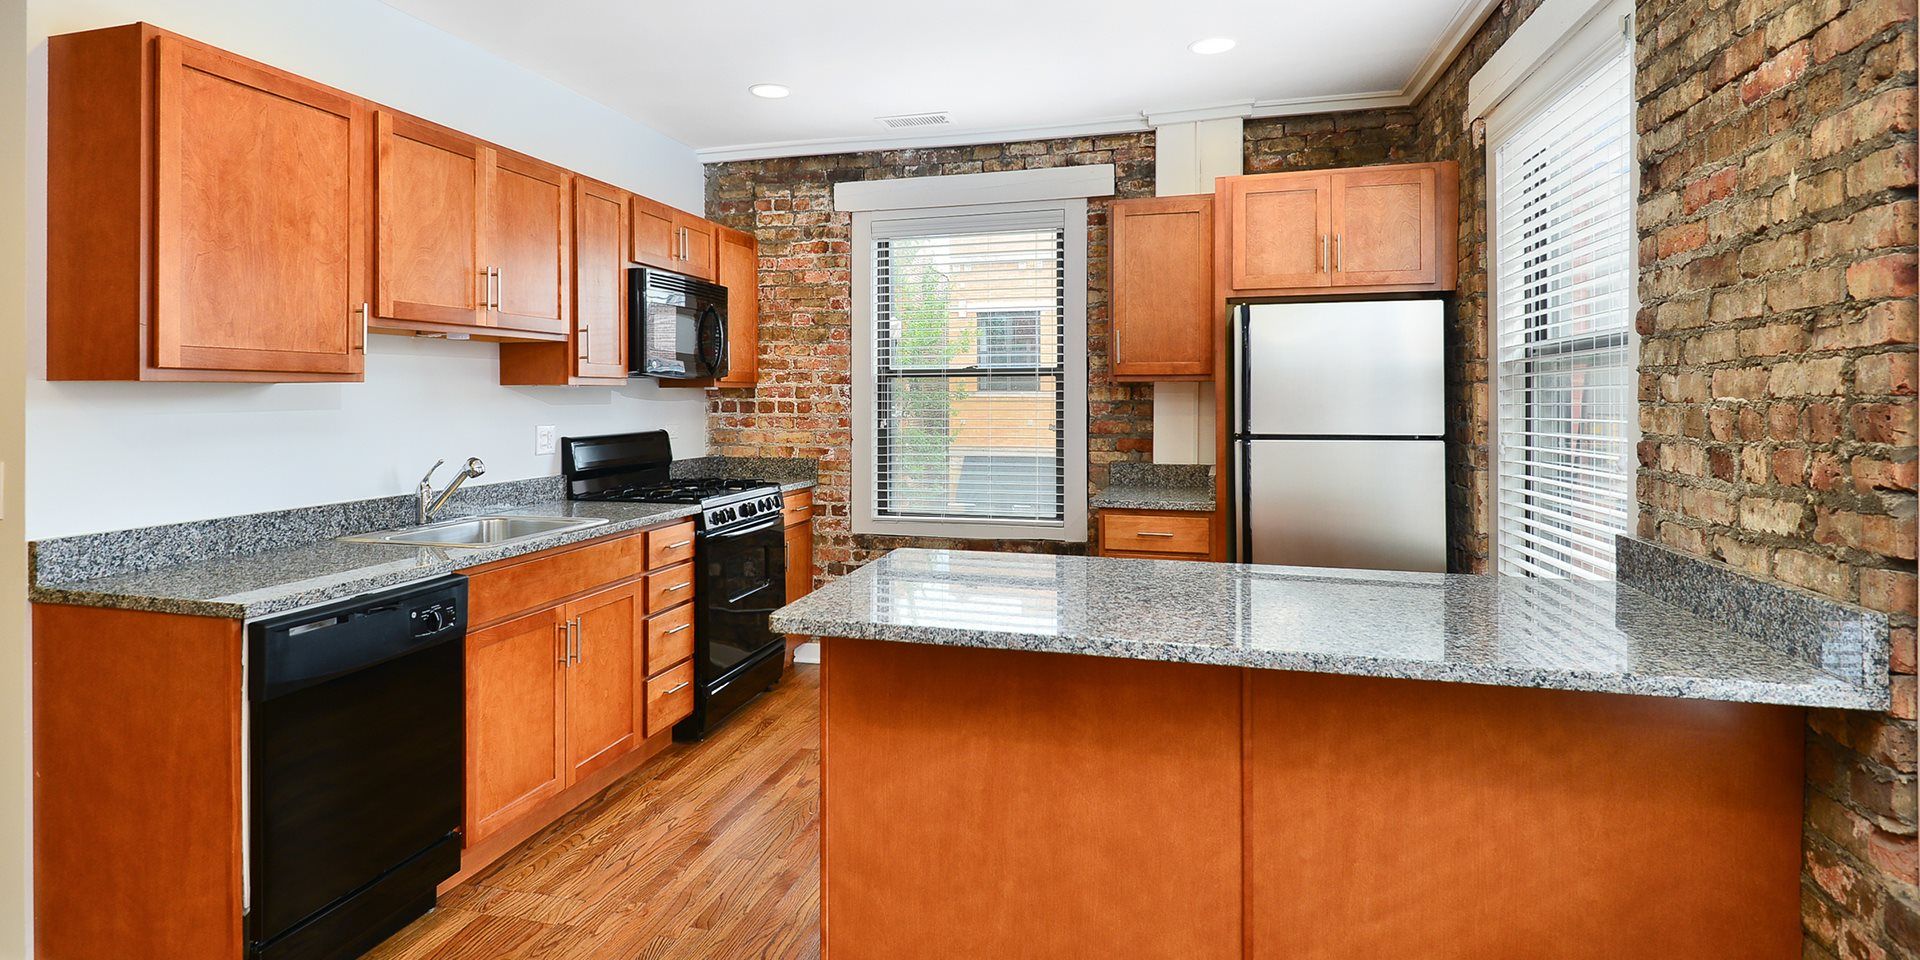 A kitchen with wooden cabinets , granite counter tops , stainless steel appliances and a large island at 1640 N Damen Apartments.